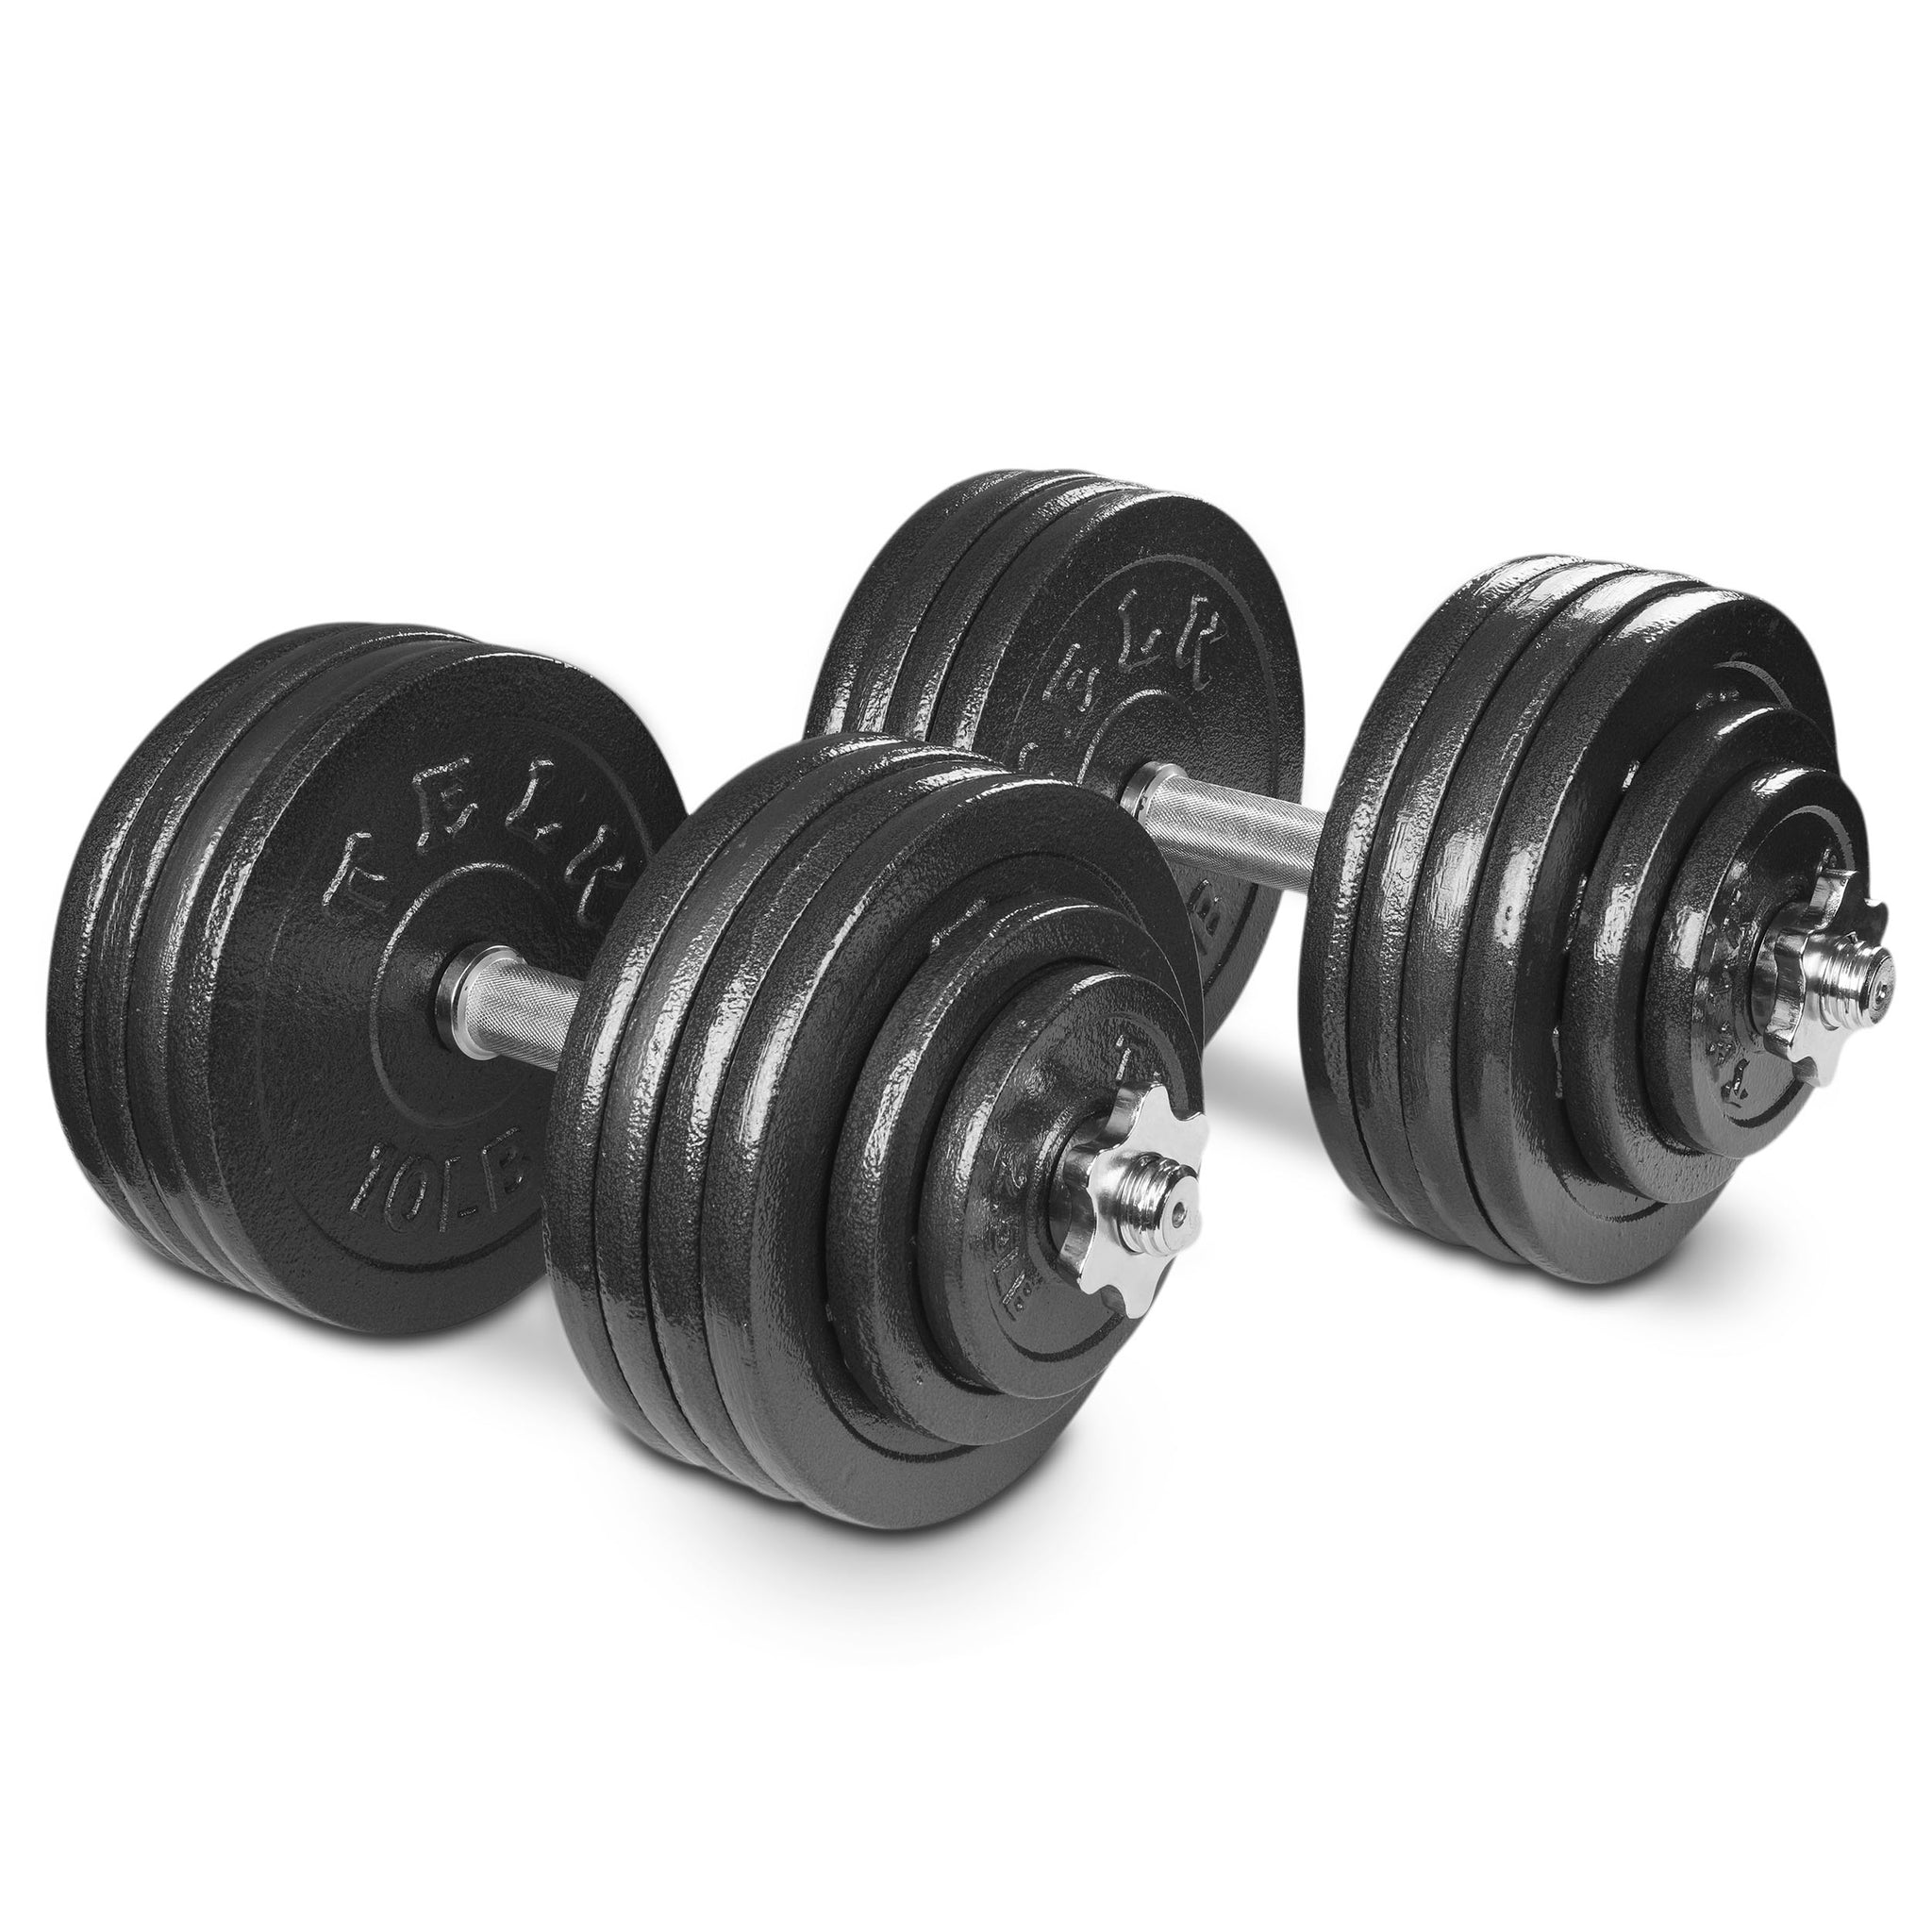 Weights & Gym Equipment - Free Weights & Sets